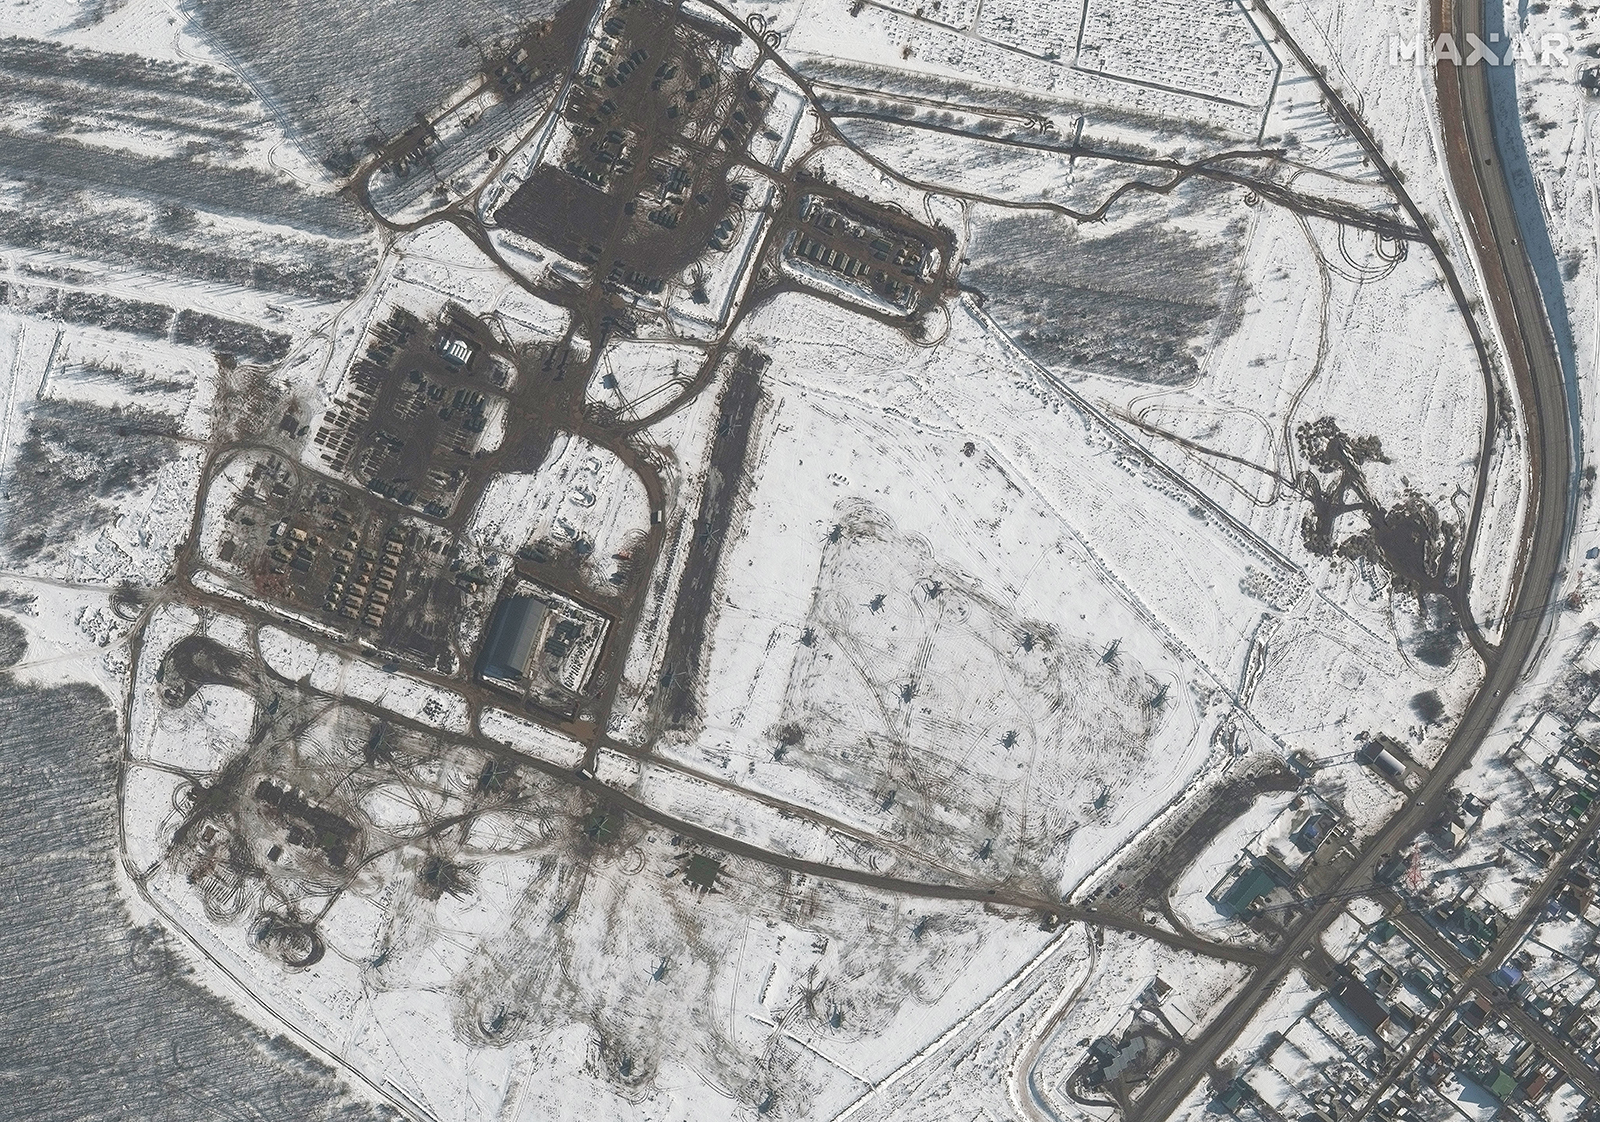 A satellite image shows an overview of helicopter deployments at Valuyki, Russia on February 20. 